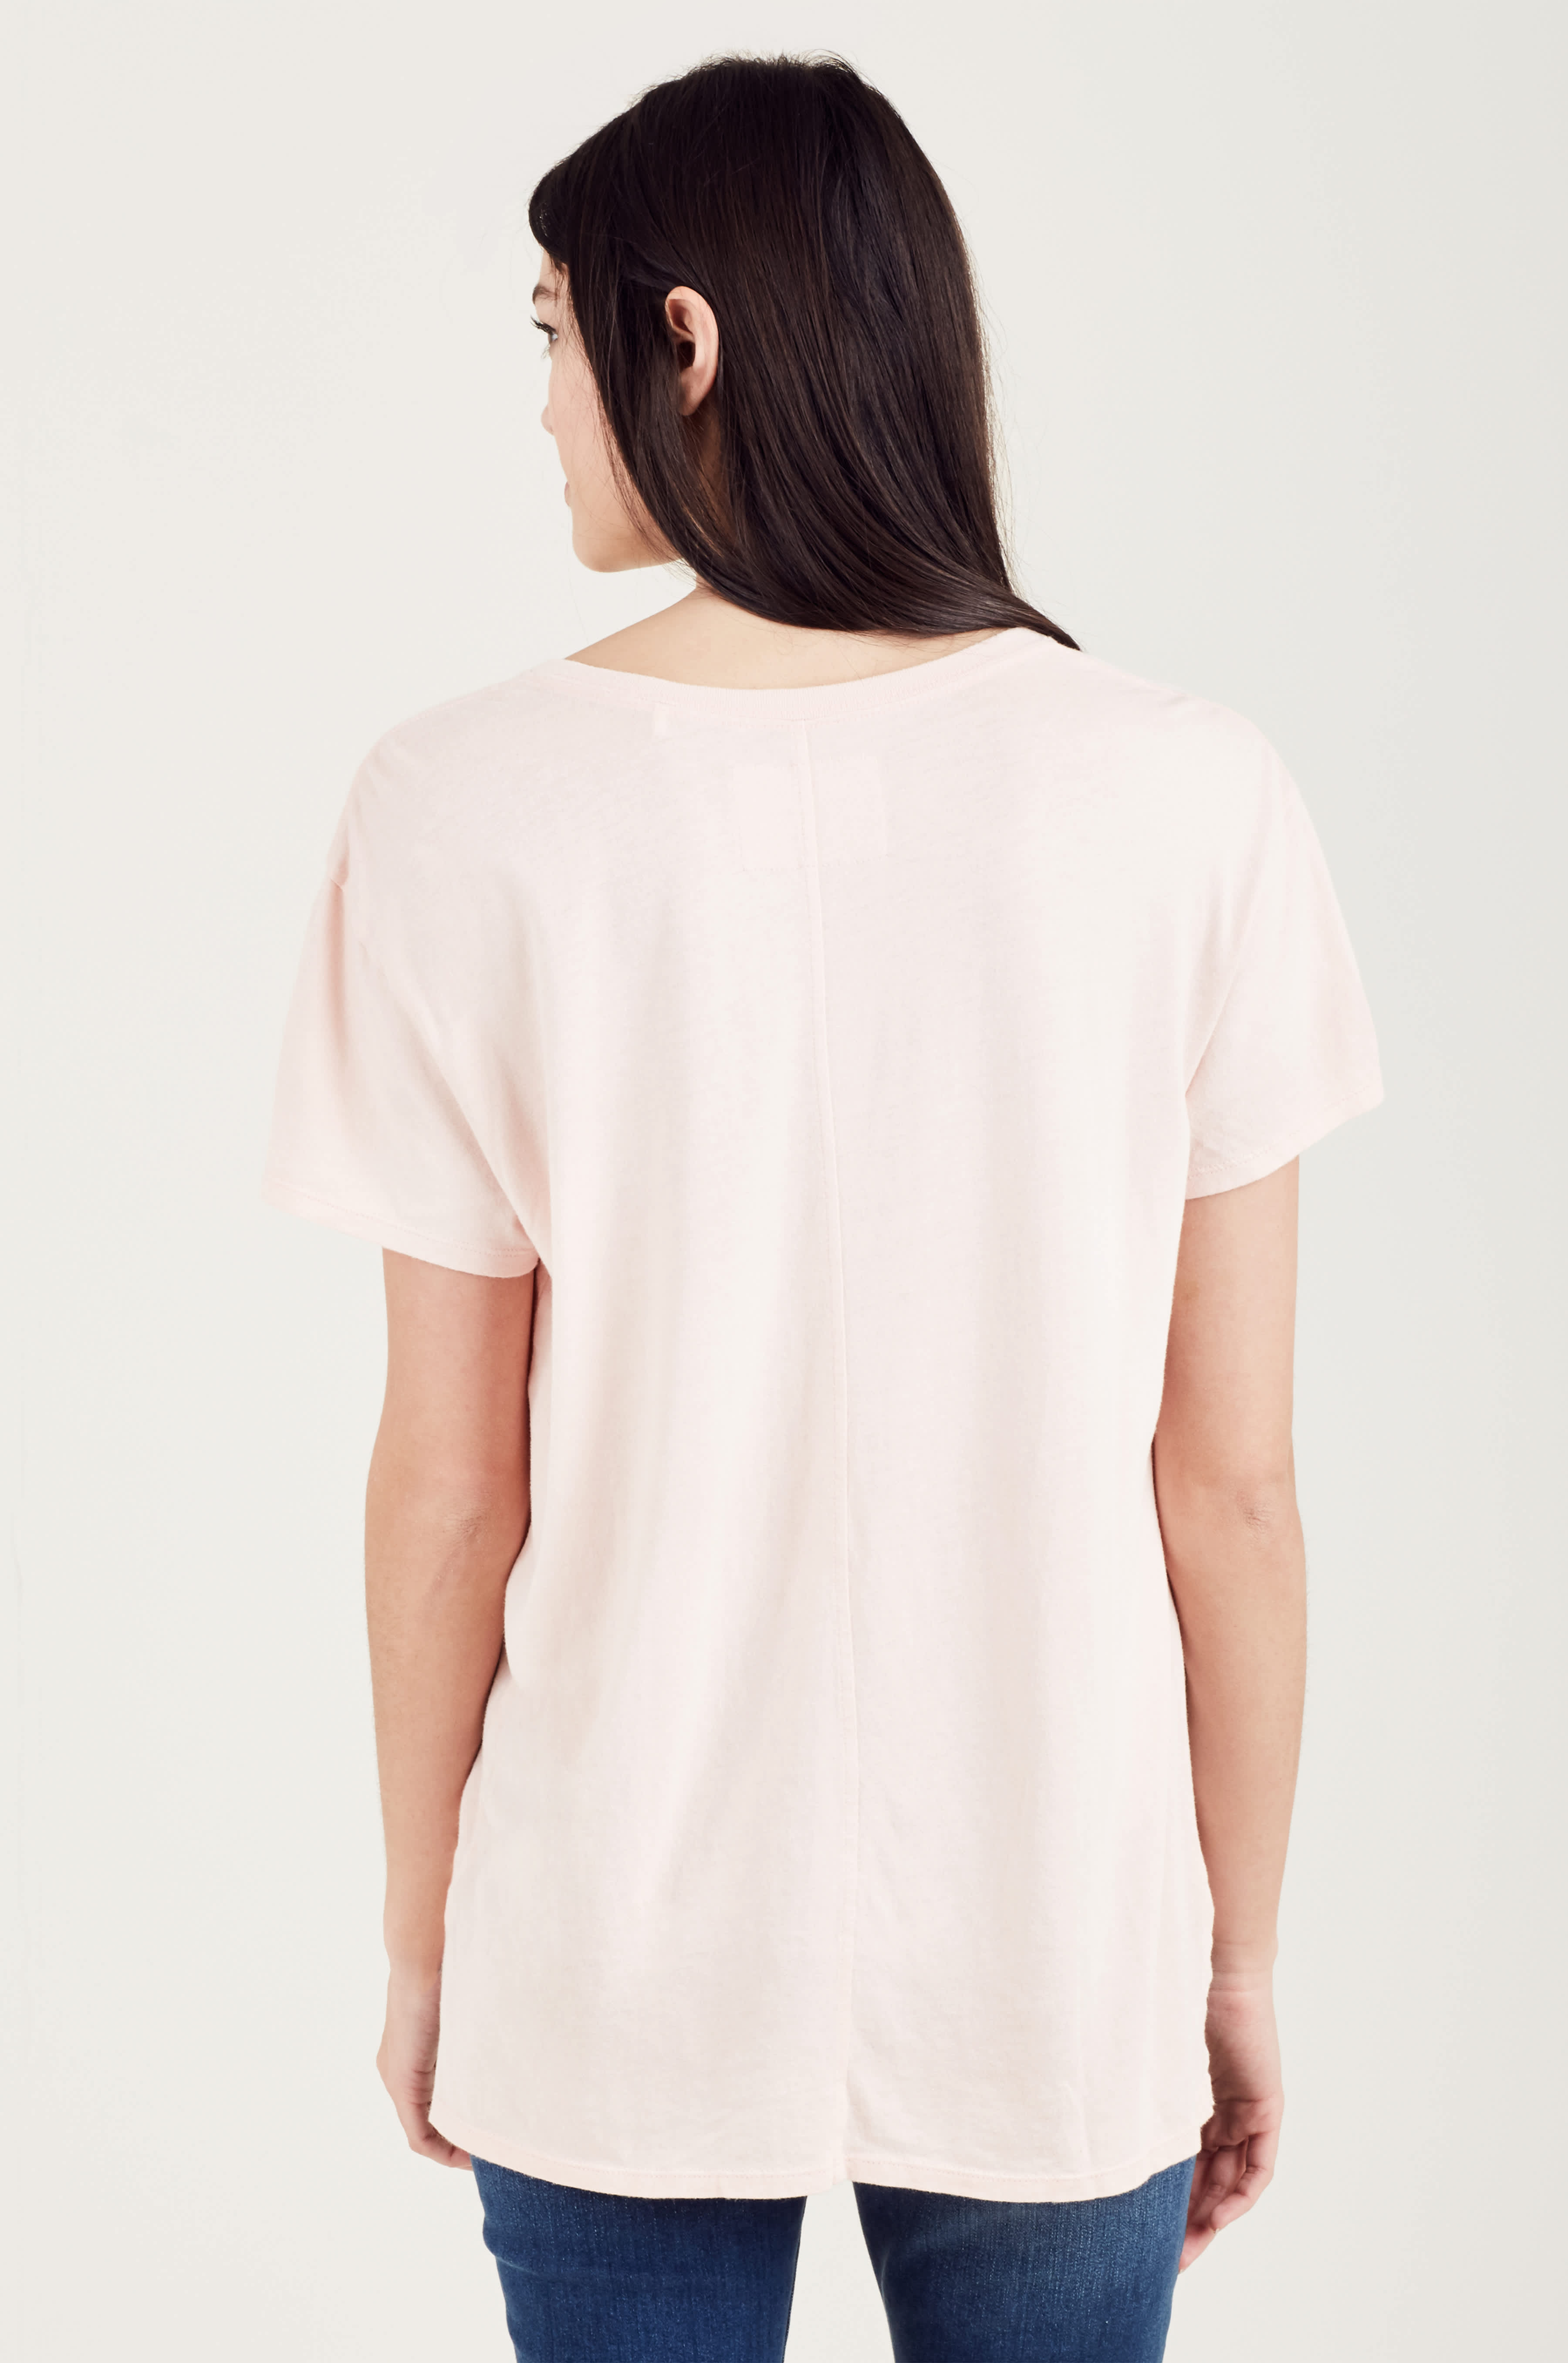 SLOUCHY V NECK WOMENS TOP